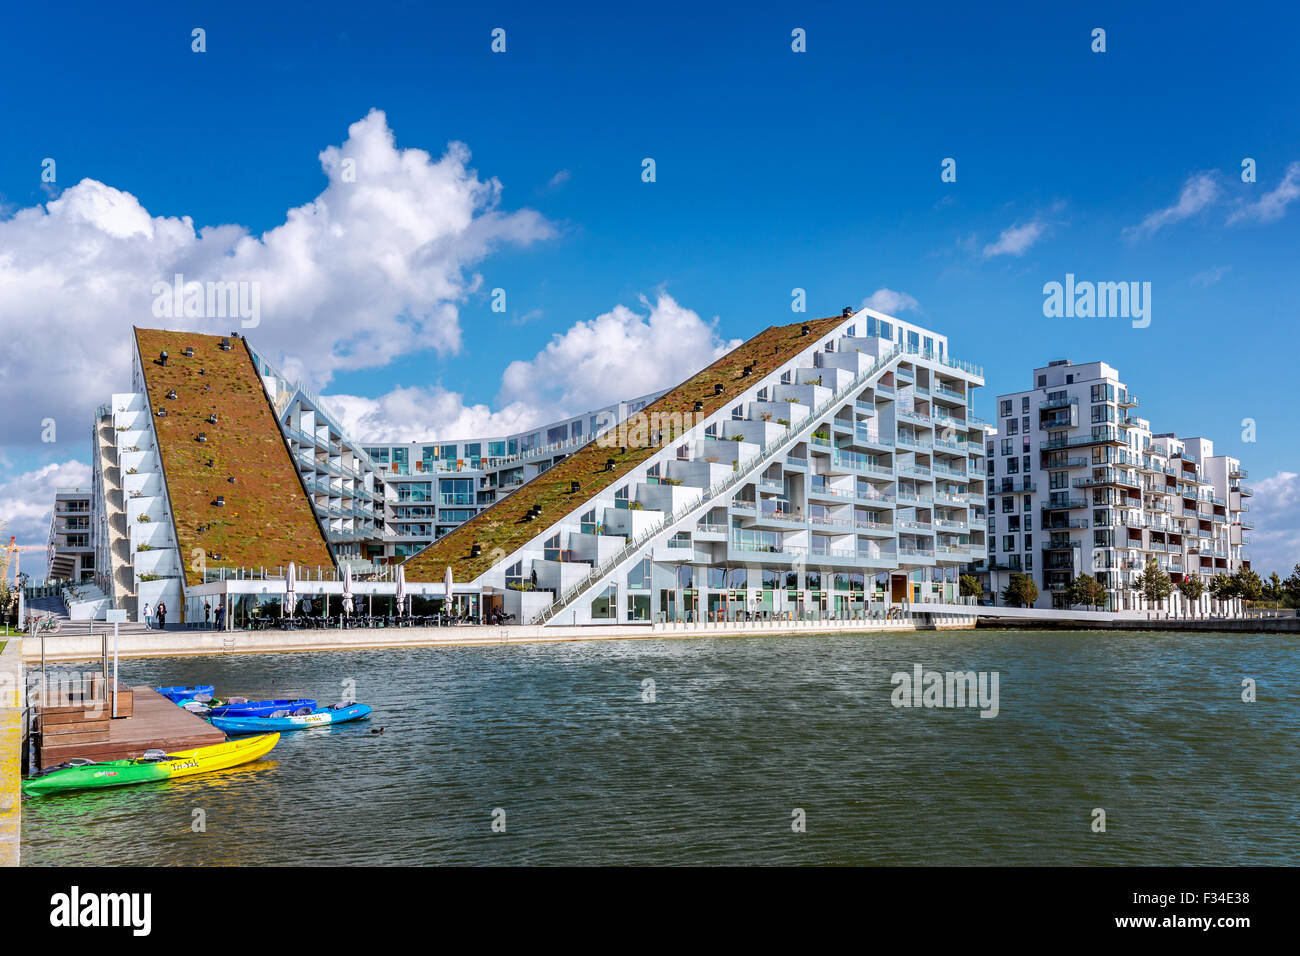 8 House, also known as 8 Tallet or Big House, architect Bjarke Ingels, 2011 prize for best building in the world, Copenhagen, Denmark Stock Photo